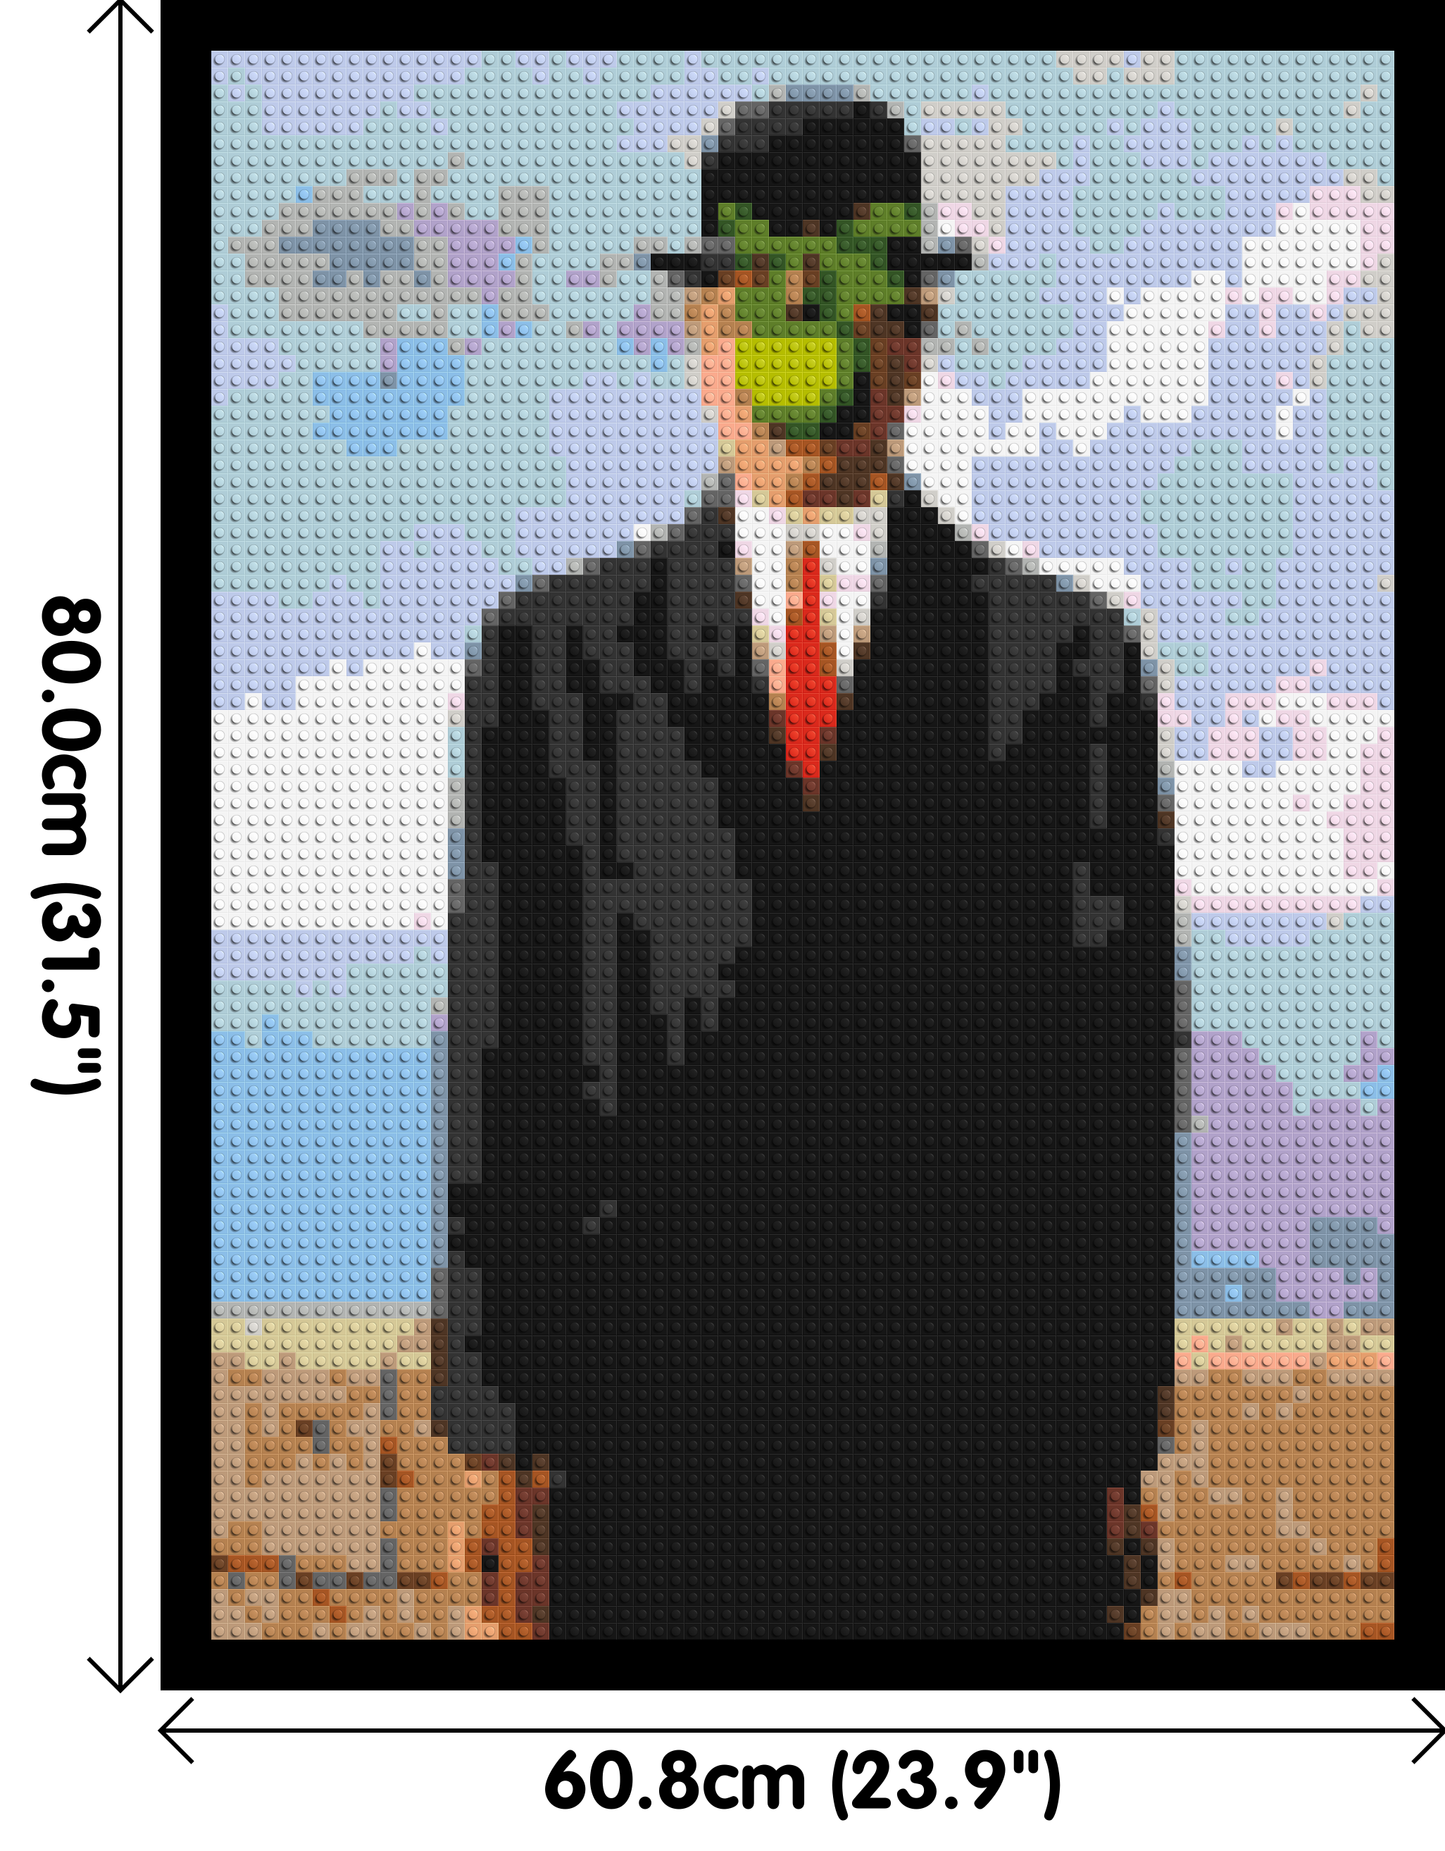 The Son of Man by René Magritte - Brick Art Mosaic Kit 3x4 large